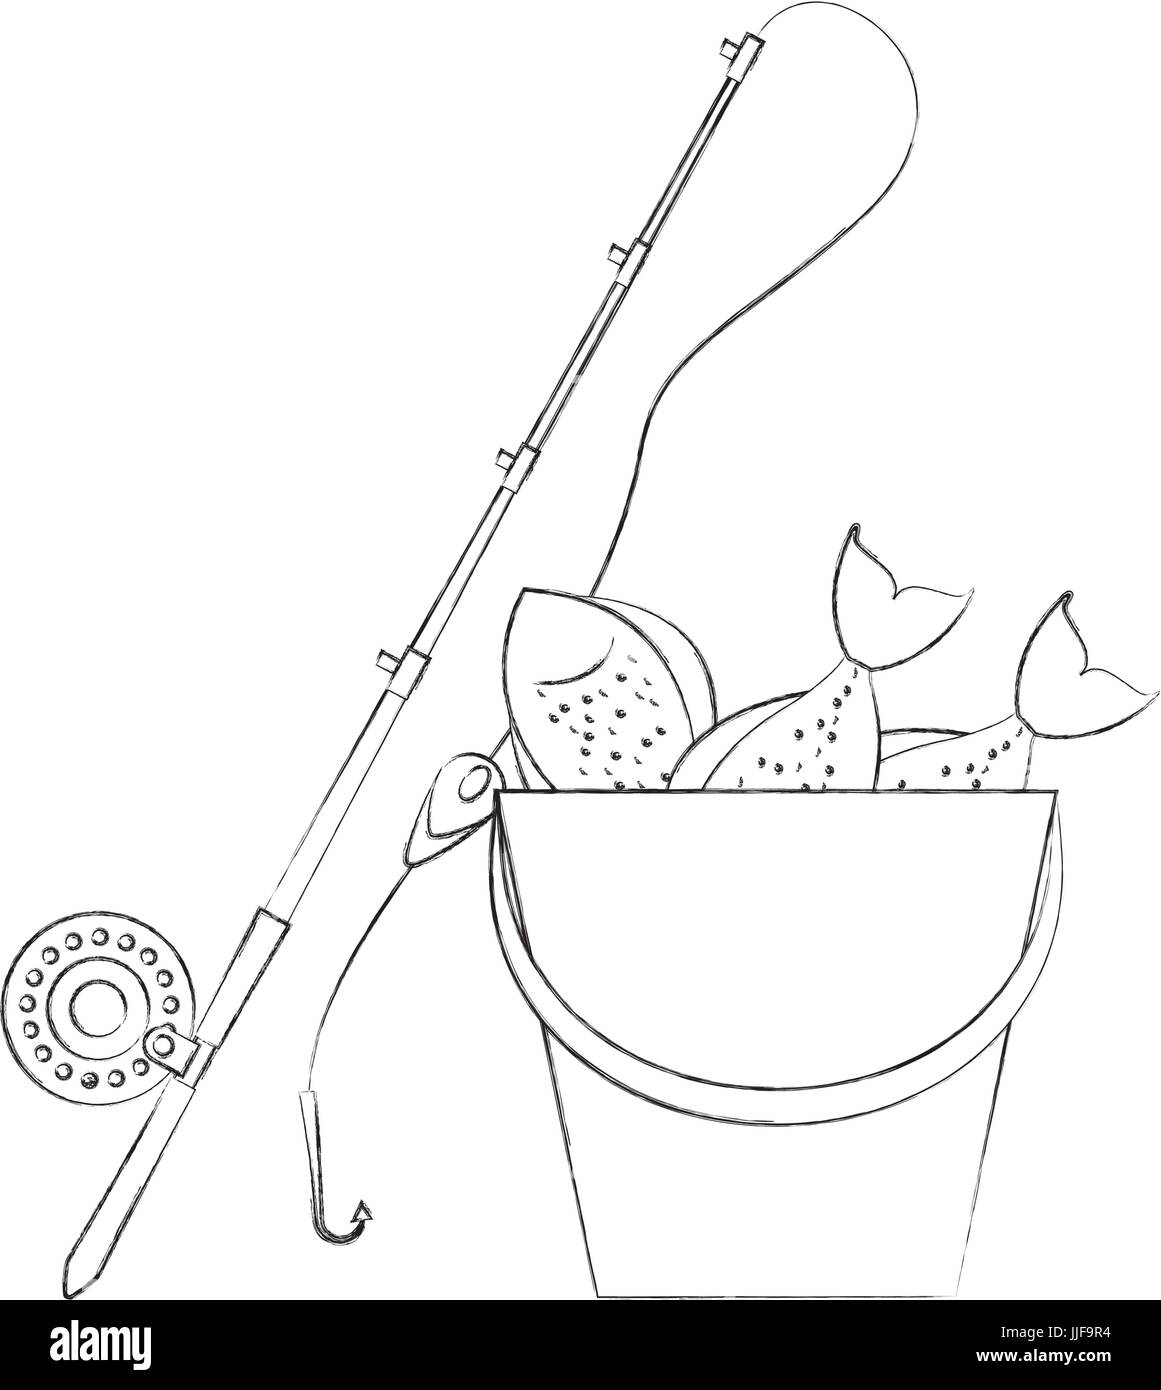 Fish bucket rod Stock Vector Images - Page 2 - Alamy